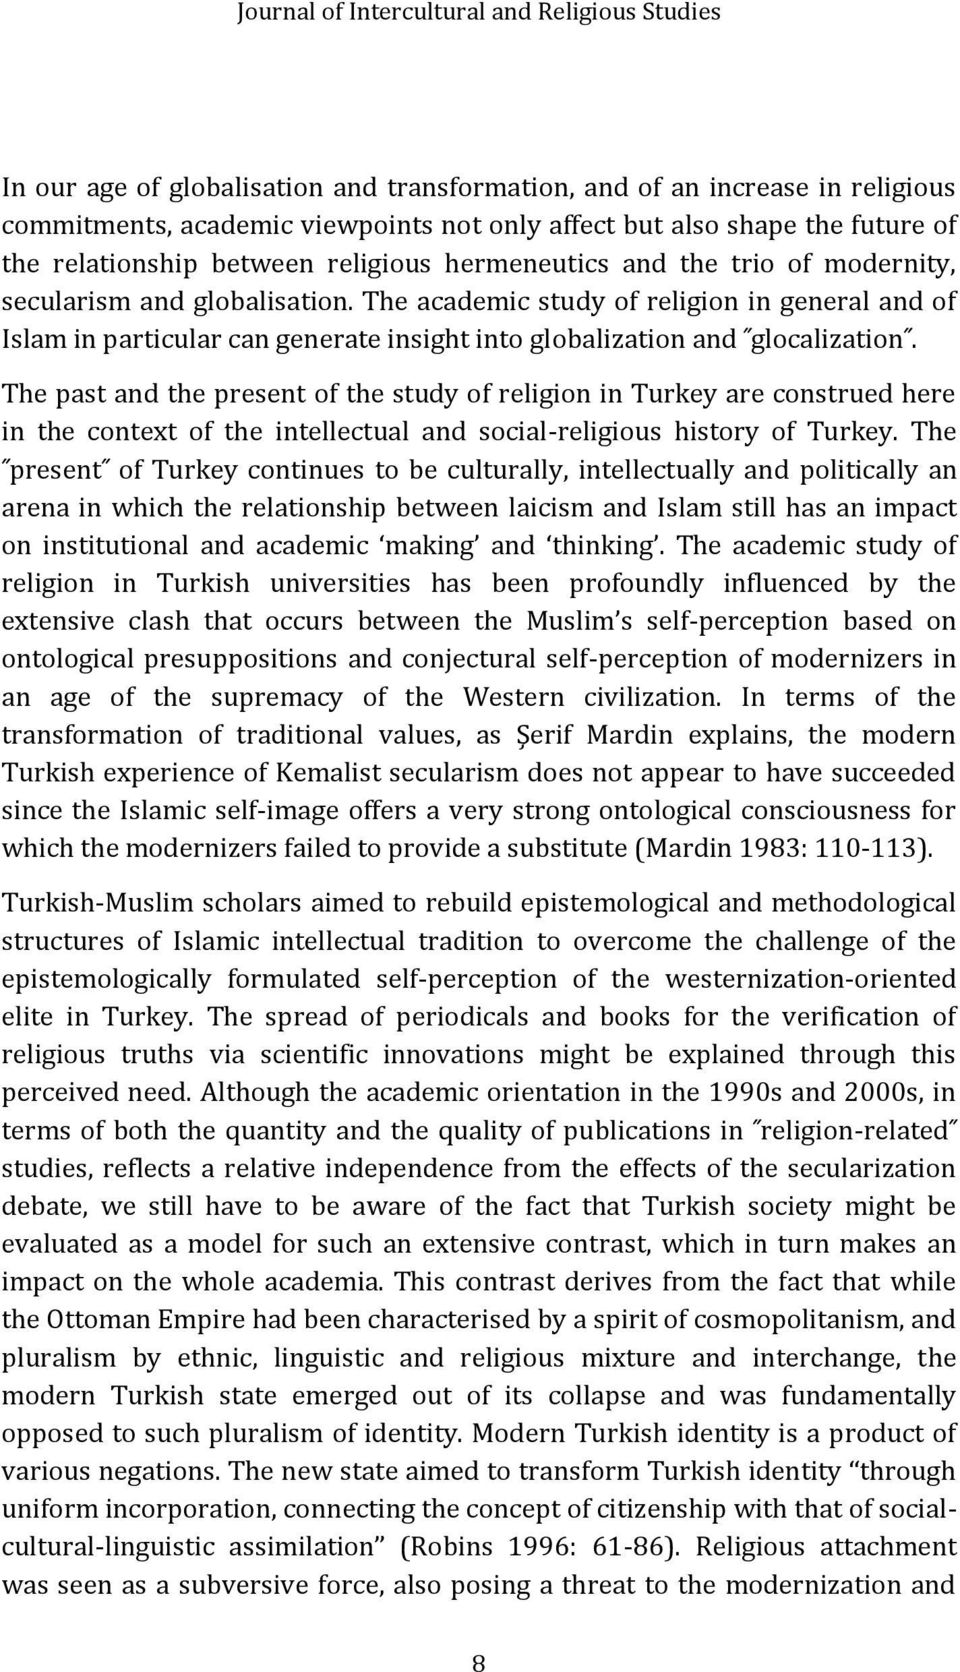 The academic study of religion in general and of Islam in particular can generate insight into globalization and glocalization.